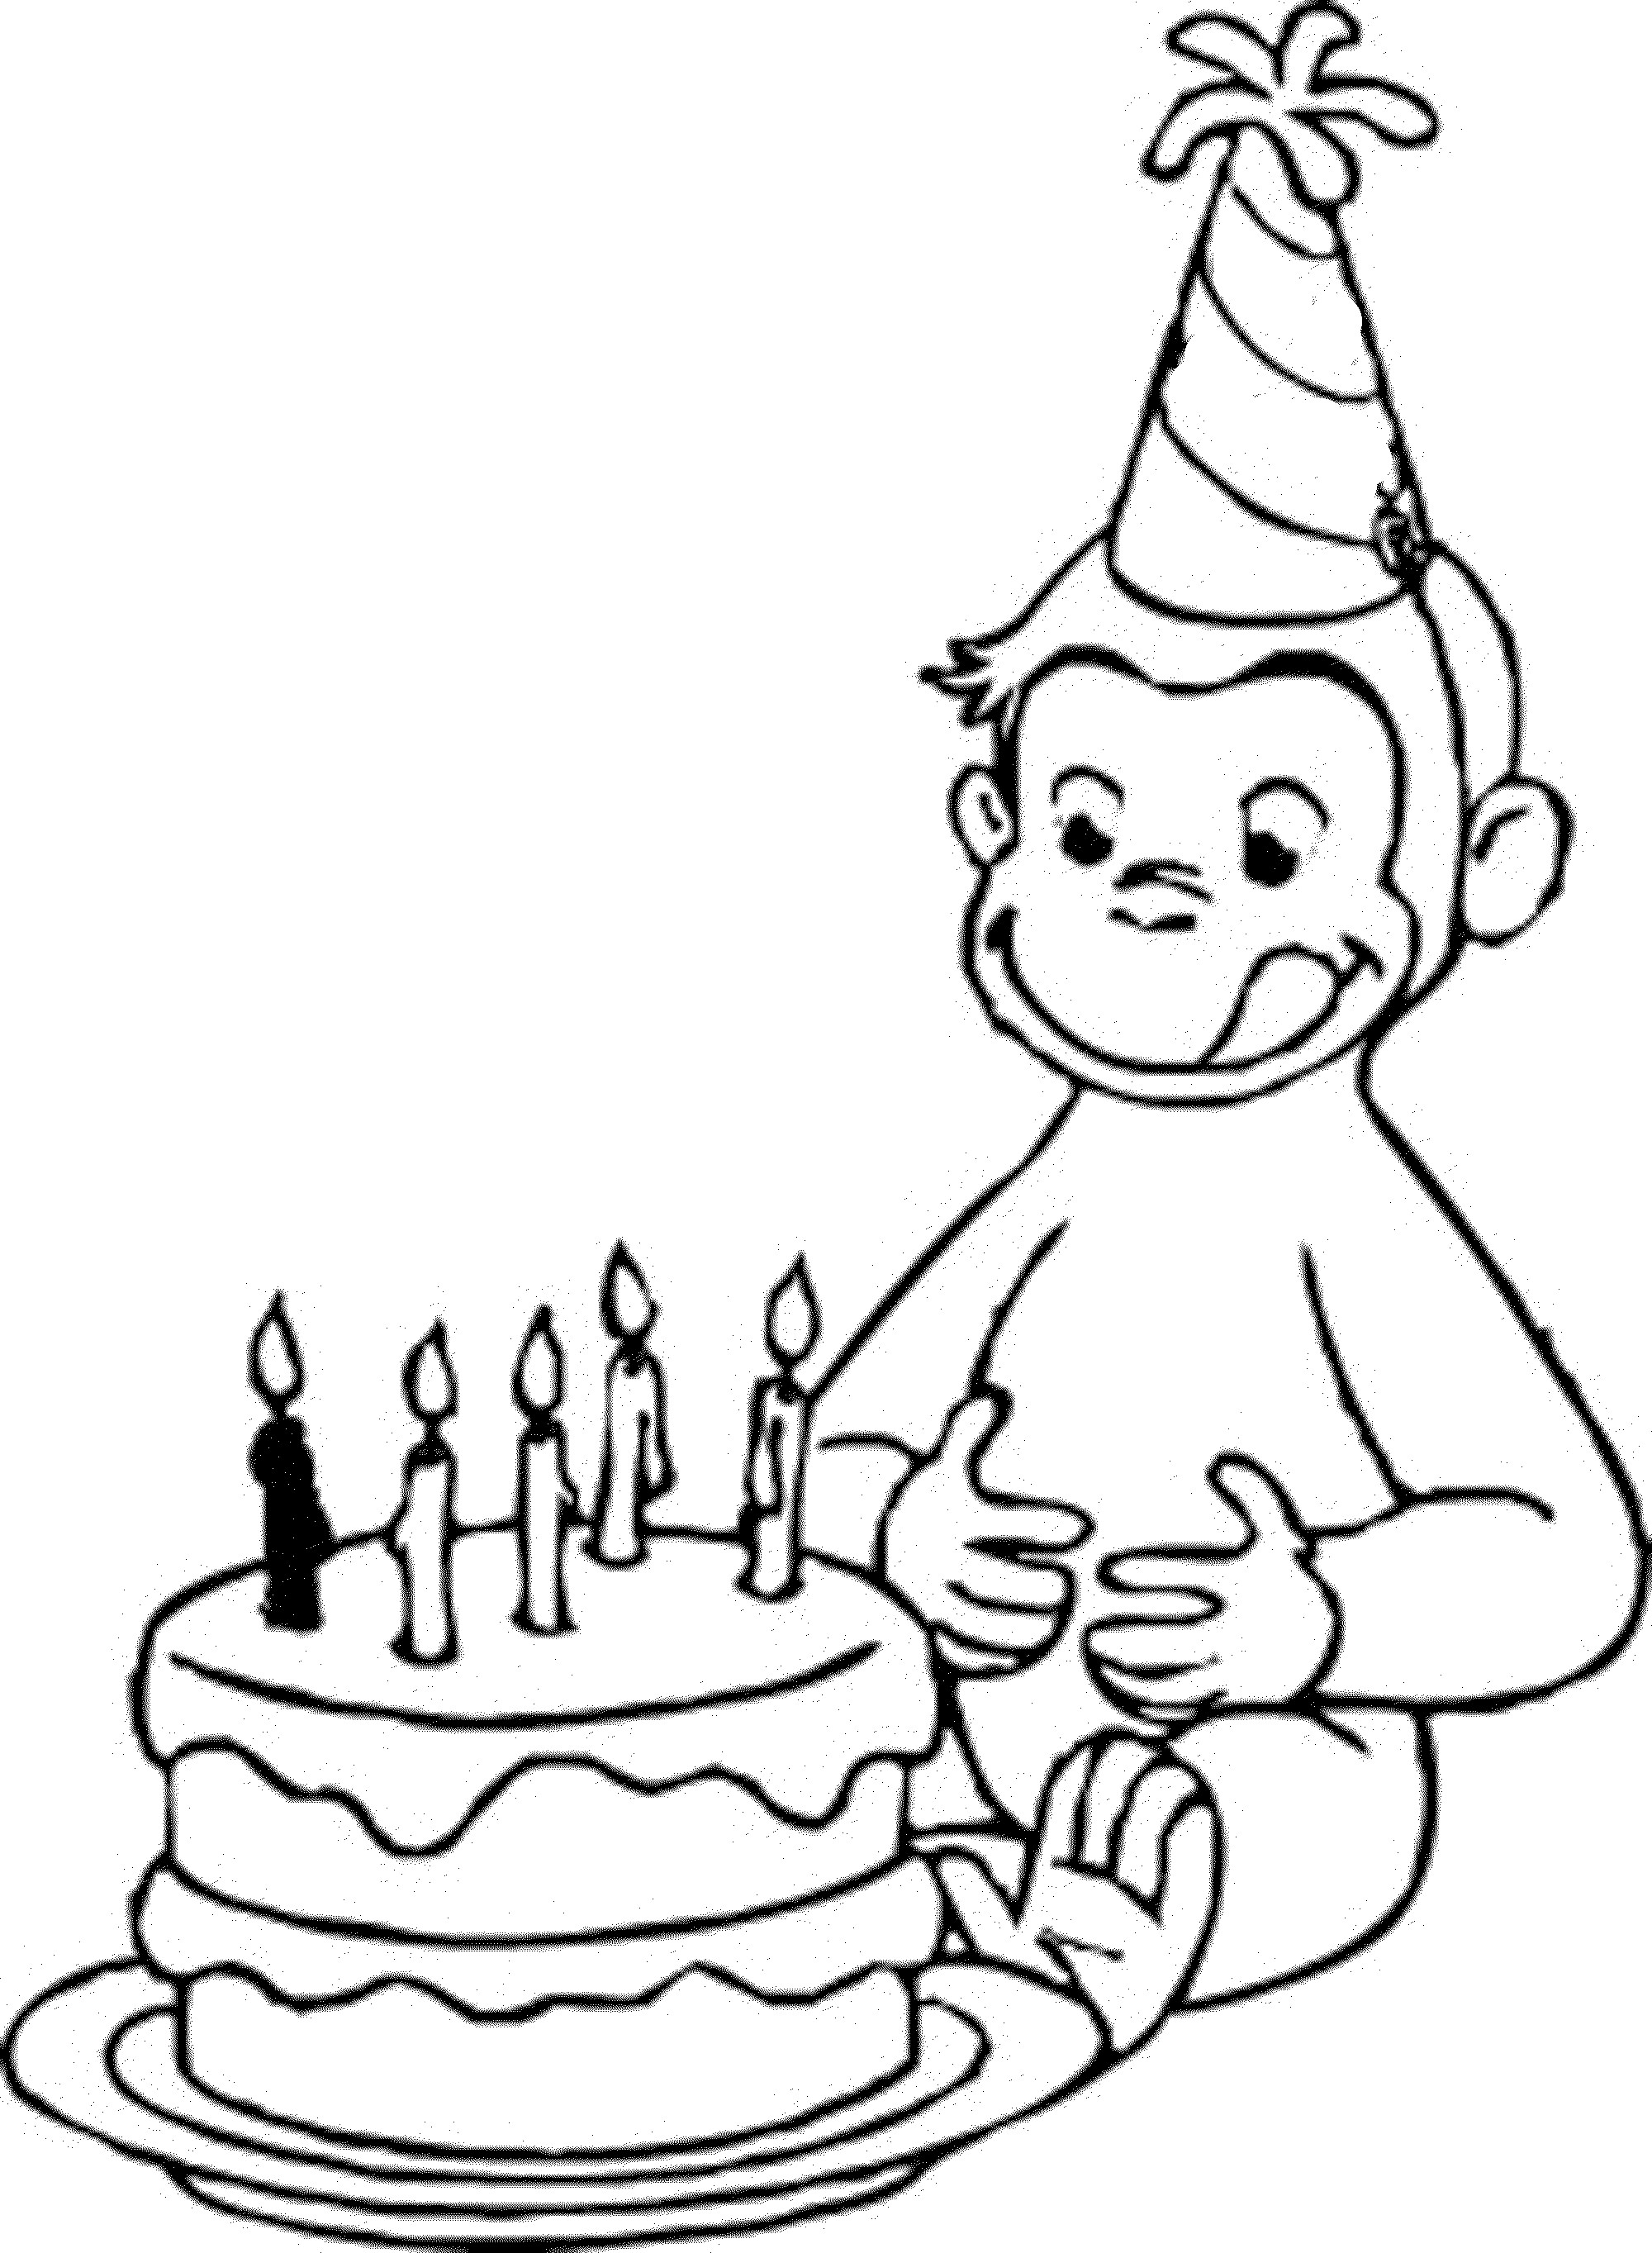 Curious Gorge Coloring Pages
 Printable Curious George Coloring Pages Bestofcoloring